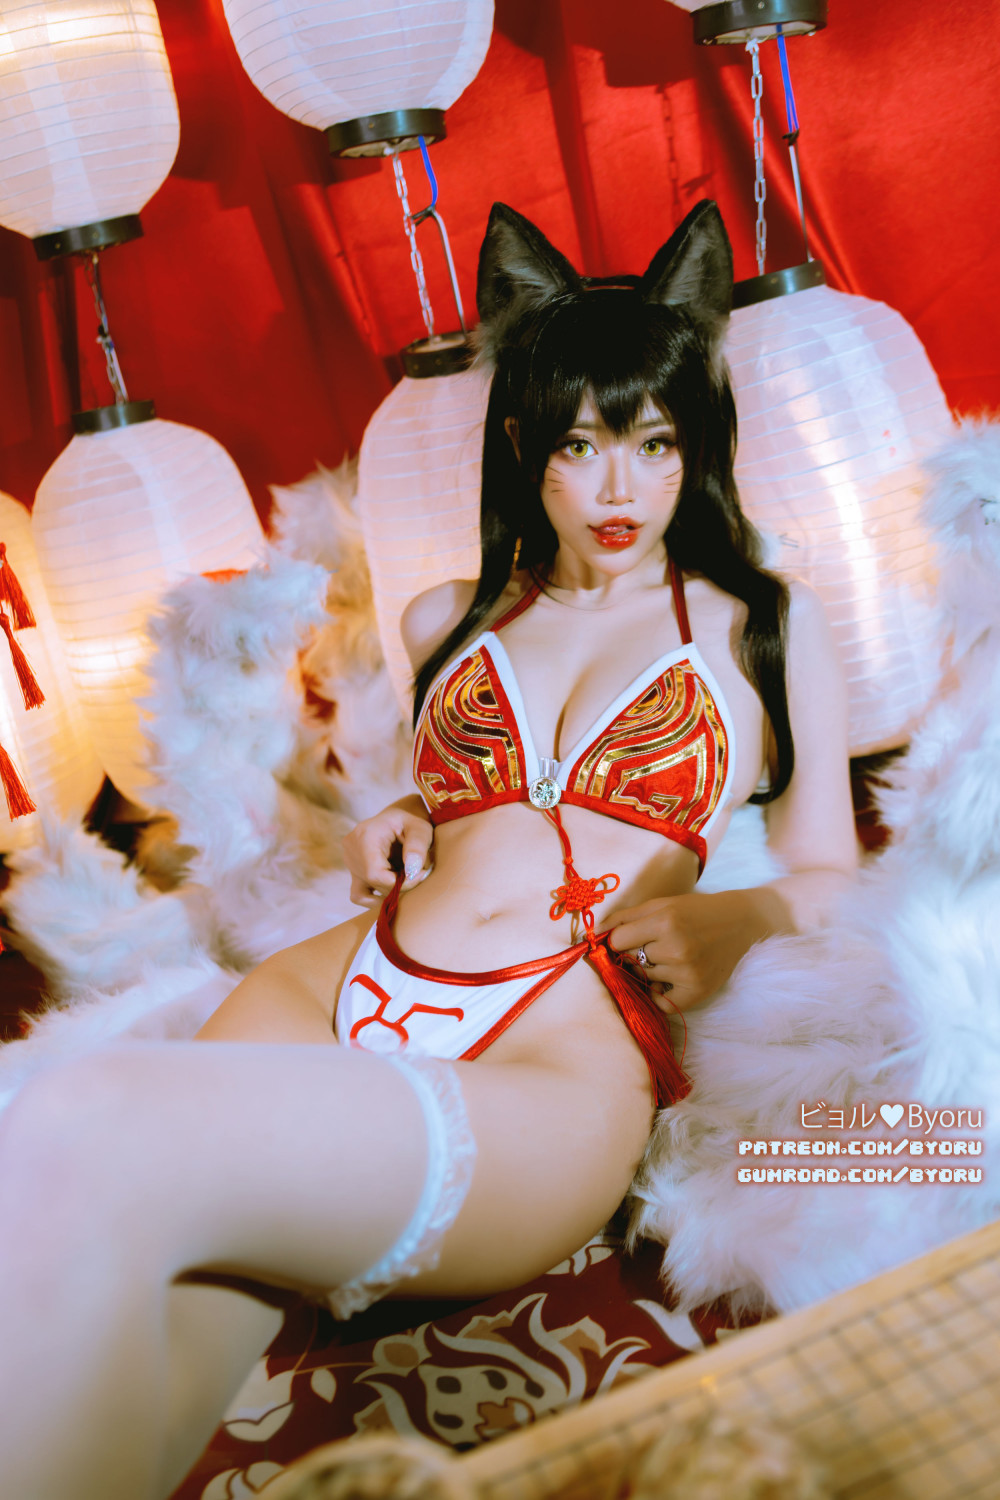 Sexiest League Of Legends Cosplay Porn - Byoru - SEXY Ahri Bikini League Of Legends Cosplay - FULL SET FREE...